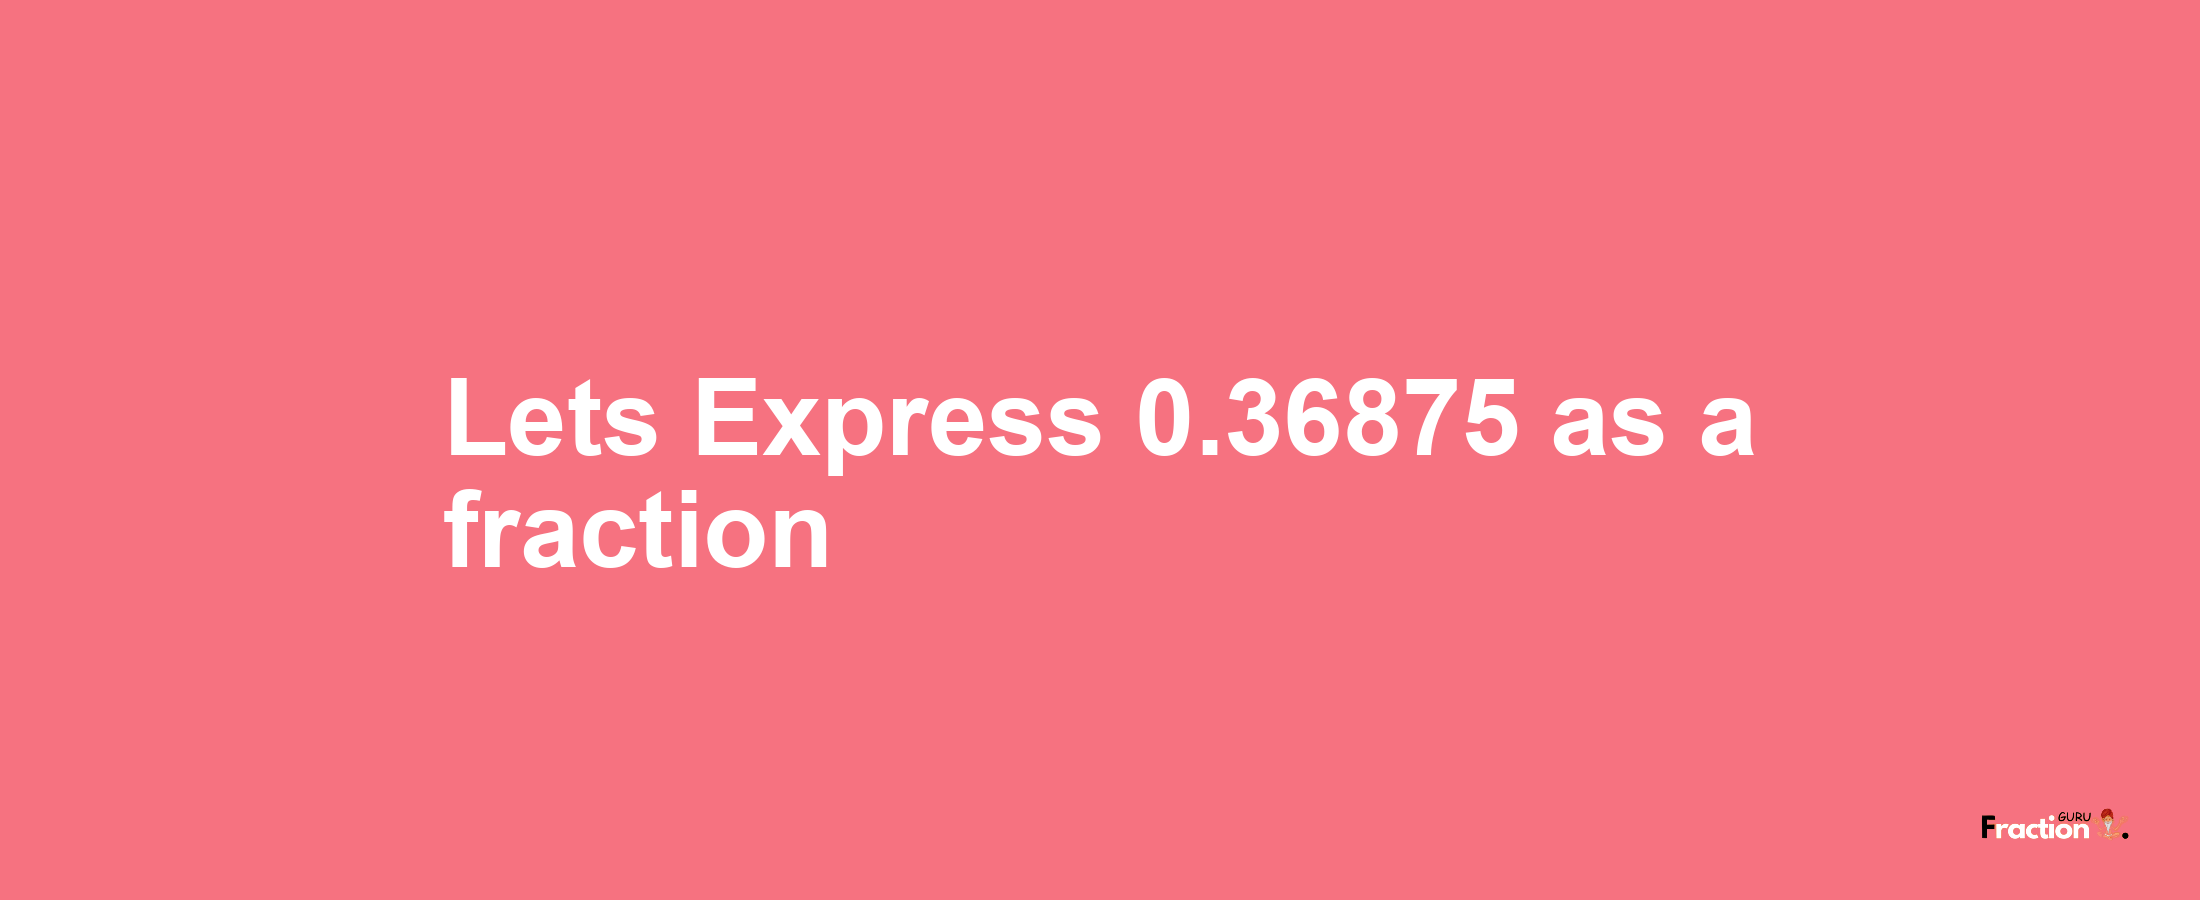 Lets Express 0.36875 as afraction